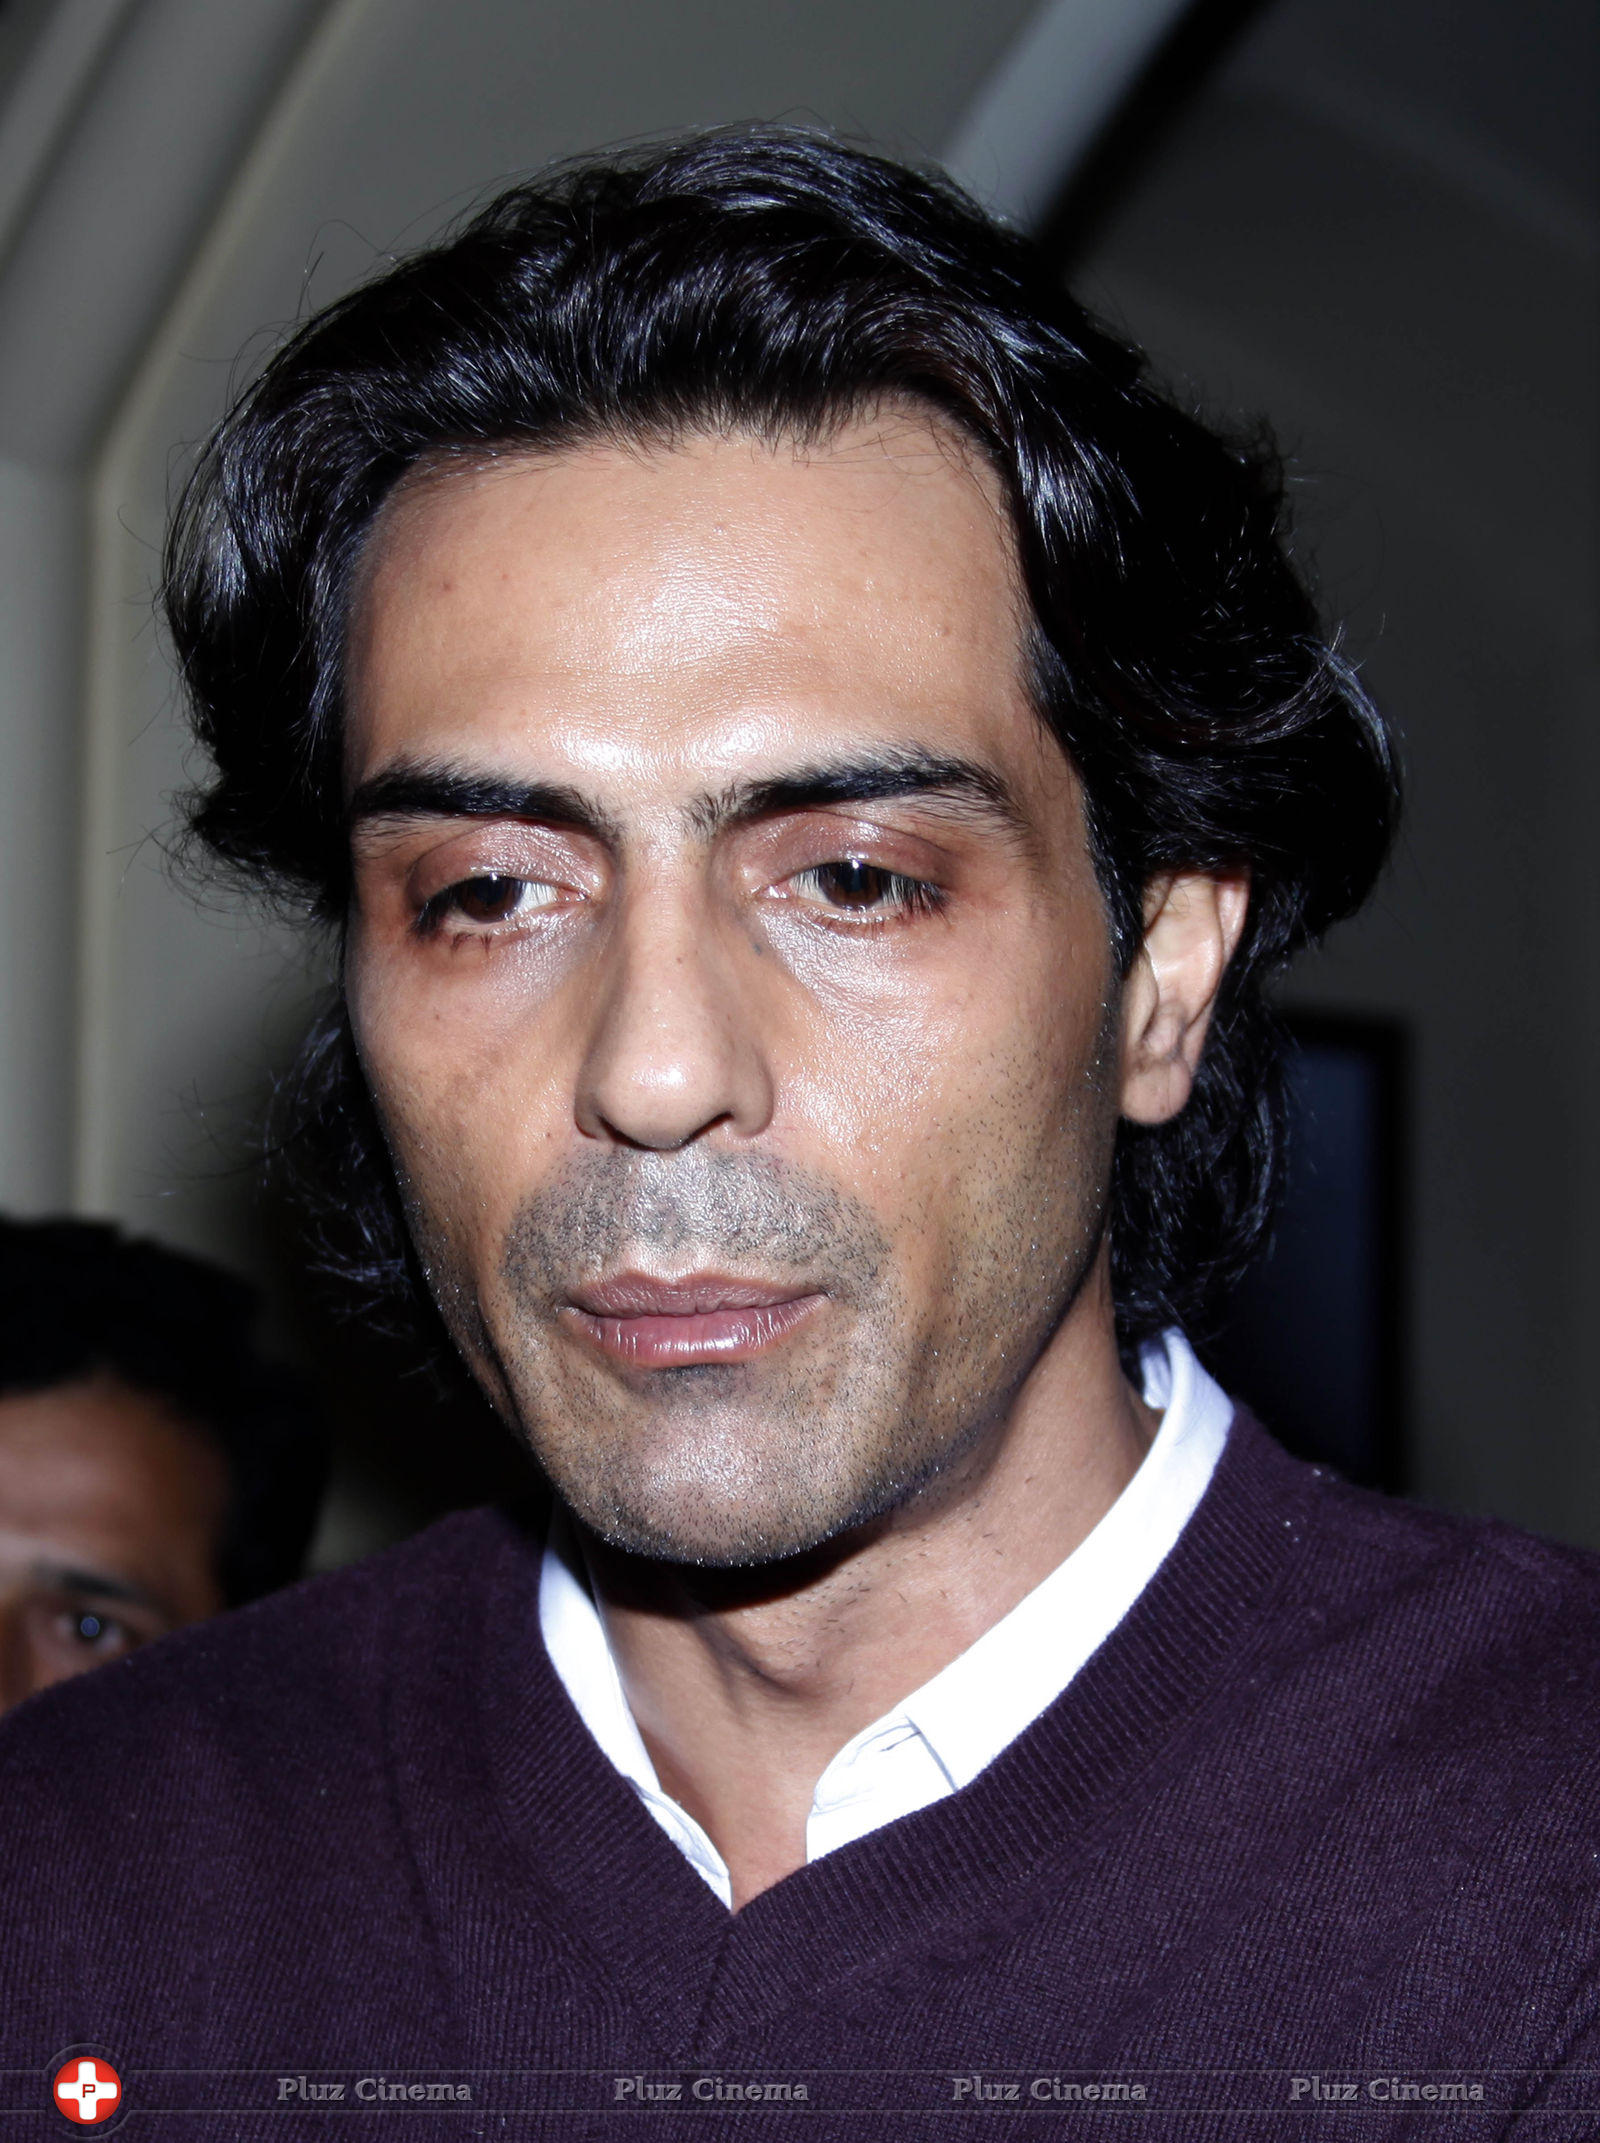 Arjun Rampal - Arjun Rampal meets Minister over elephant Sunder abuse case Photos | Picture 700207